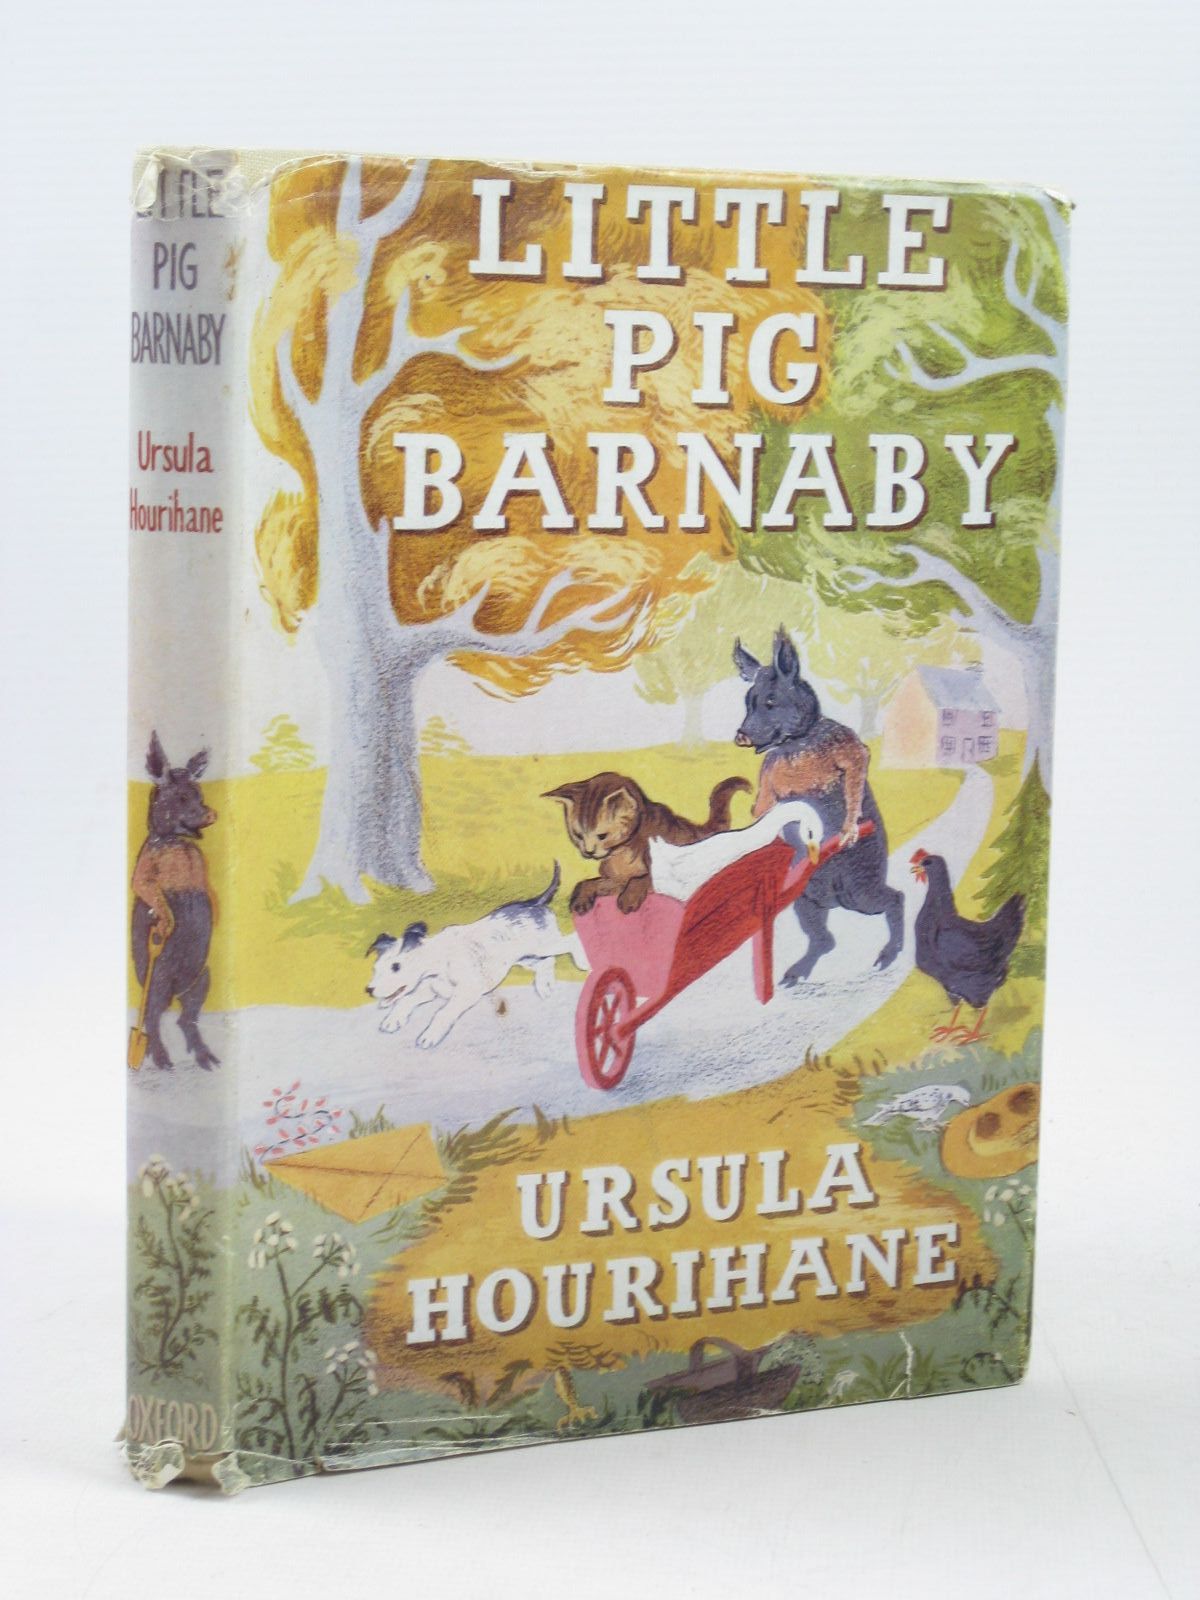 Cover of LITTLE PIG BARNABY by Ursula Hourihane